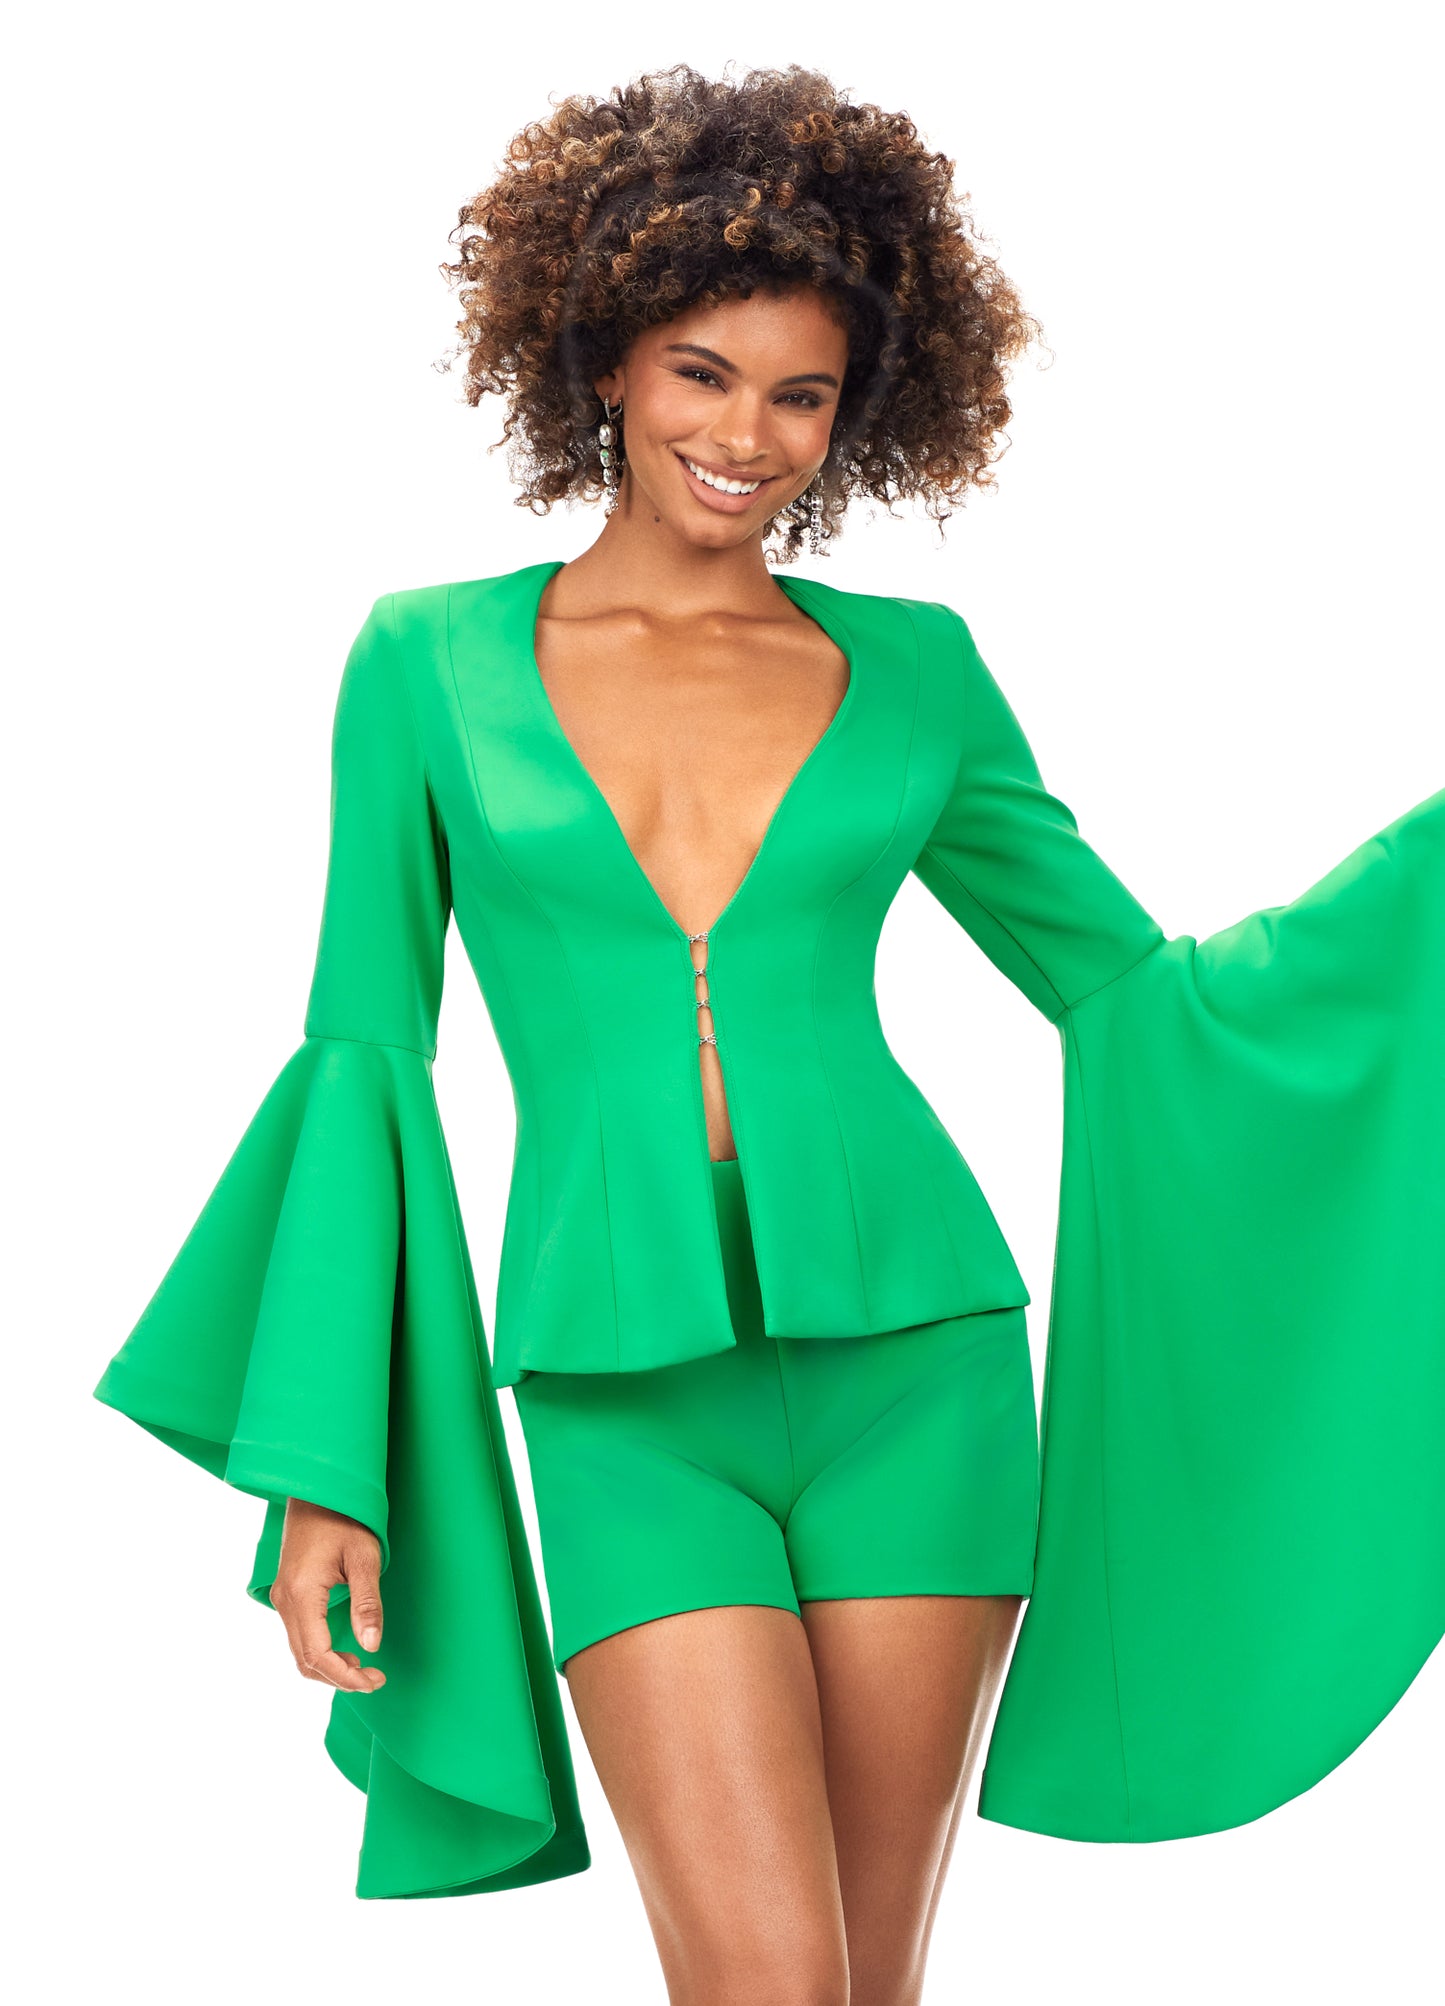 Ashley Lauren 4572 Make a statement in this fabulous two piece romper. The top features a deep v-neckline and dramatic bell sleeves. V-Neckline Bell Sleeves Two-Piece Romper COLORS: Fuchsia, Green, Neon Orange